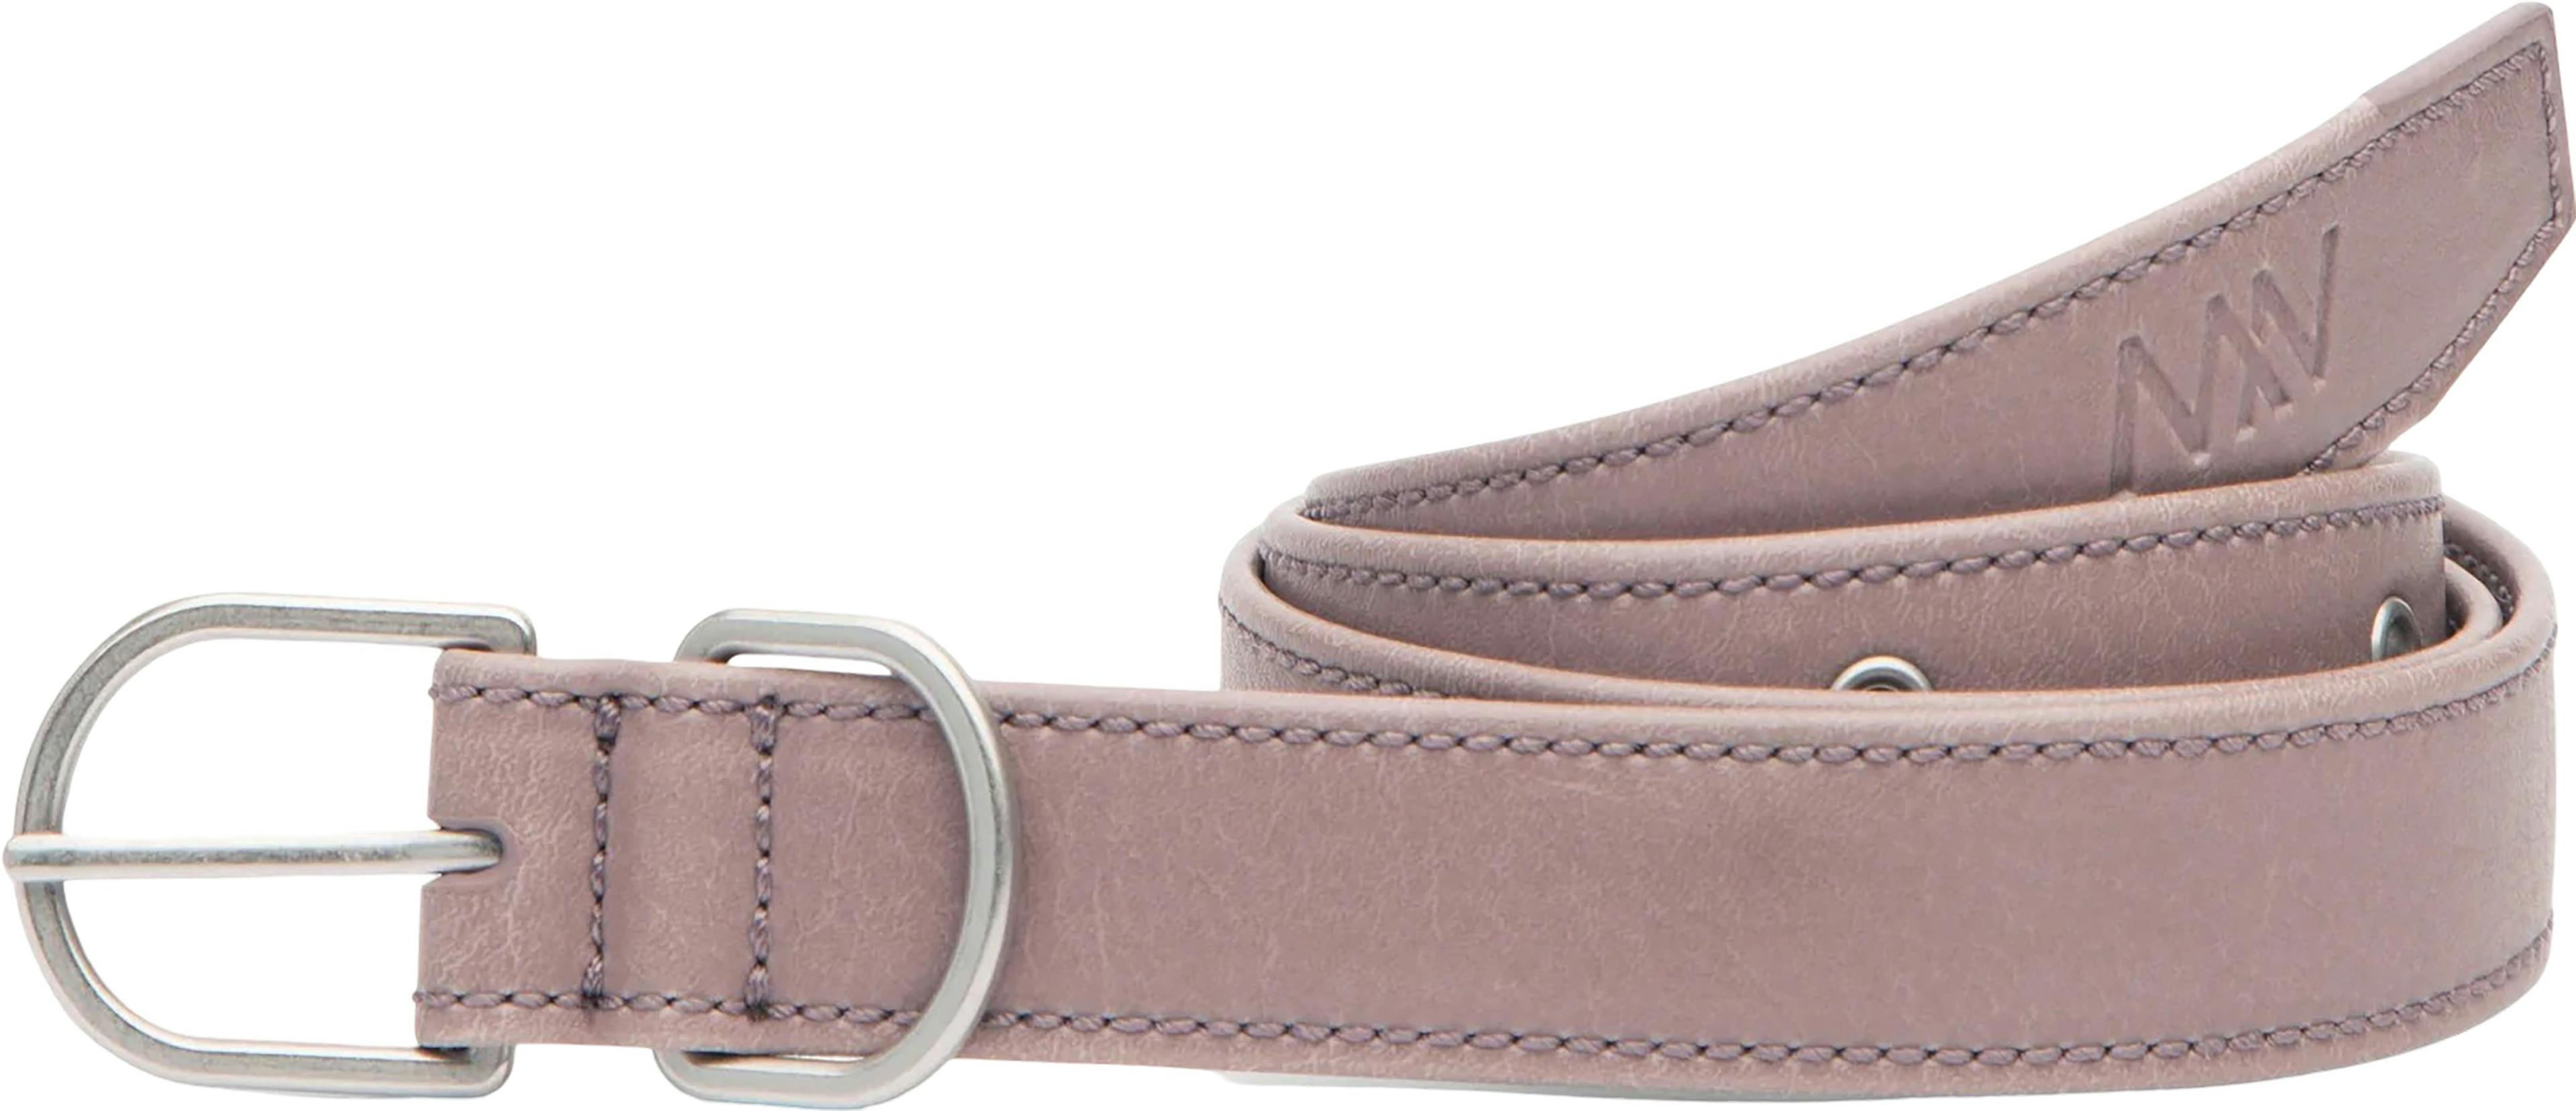 Product image for Paro Belt - Vintage Collection - Women's